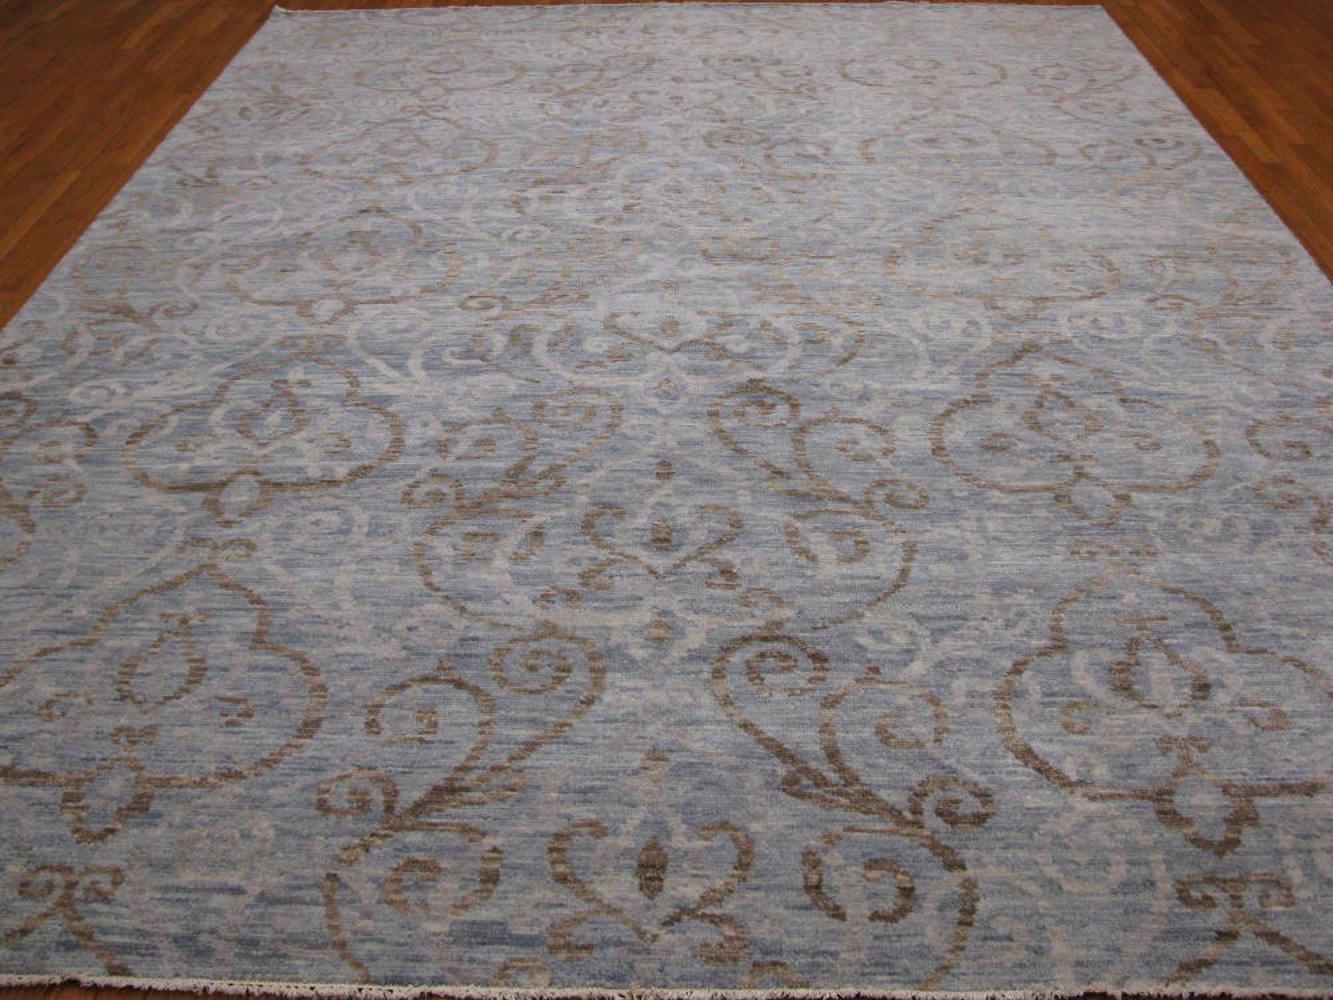 This is a large new handmade rug from India. It has a modern and contemporary design for those who desire something different. It is made with wool and stabile dyes. It measures: 9' x 12'.